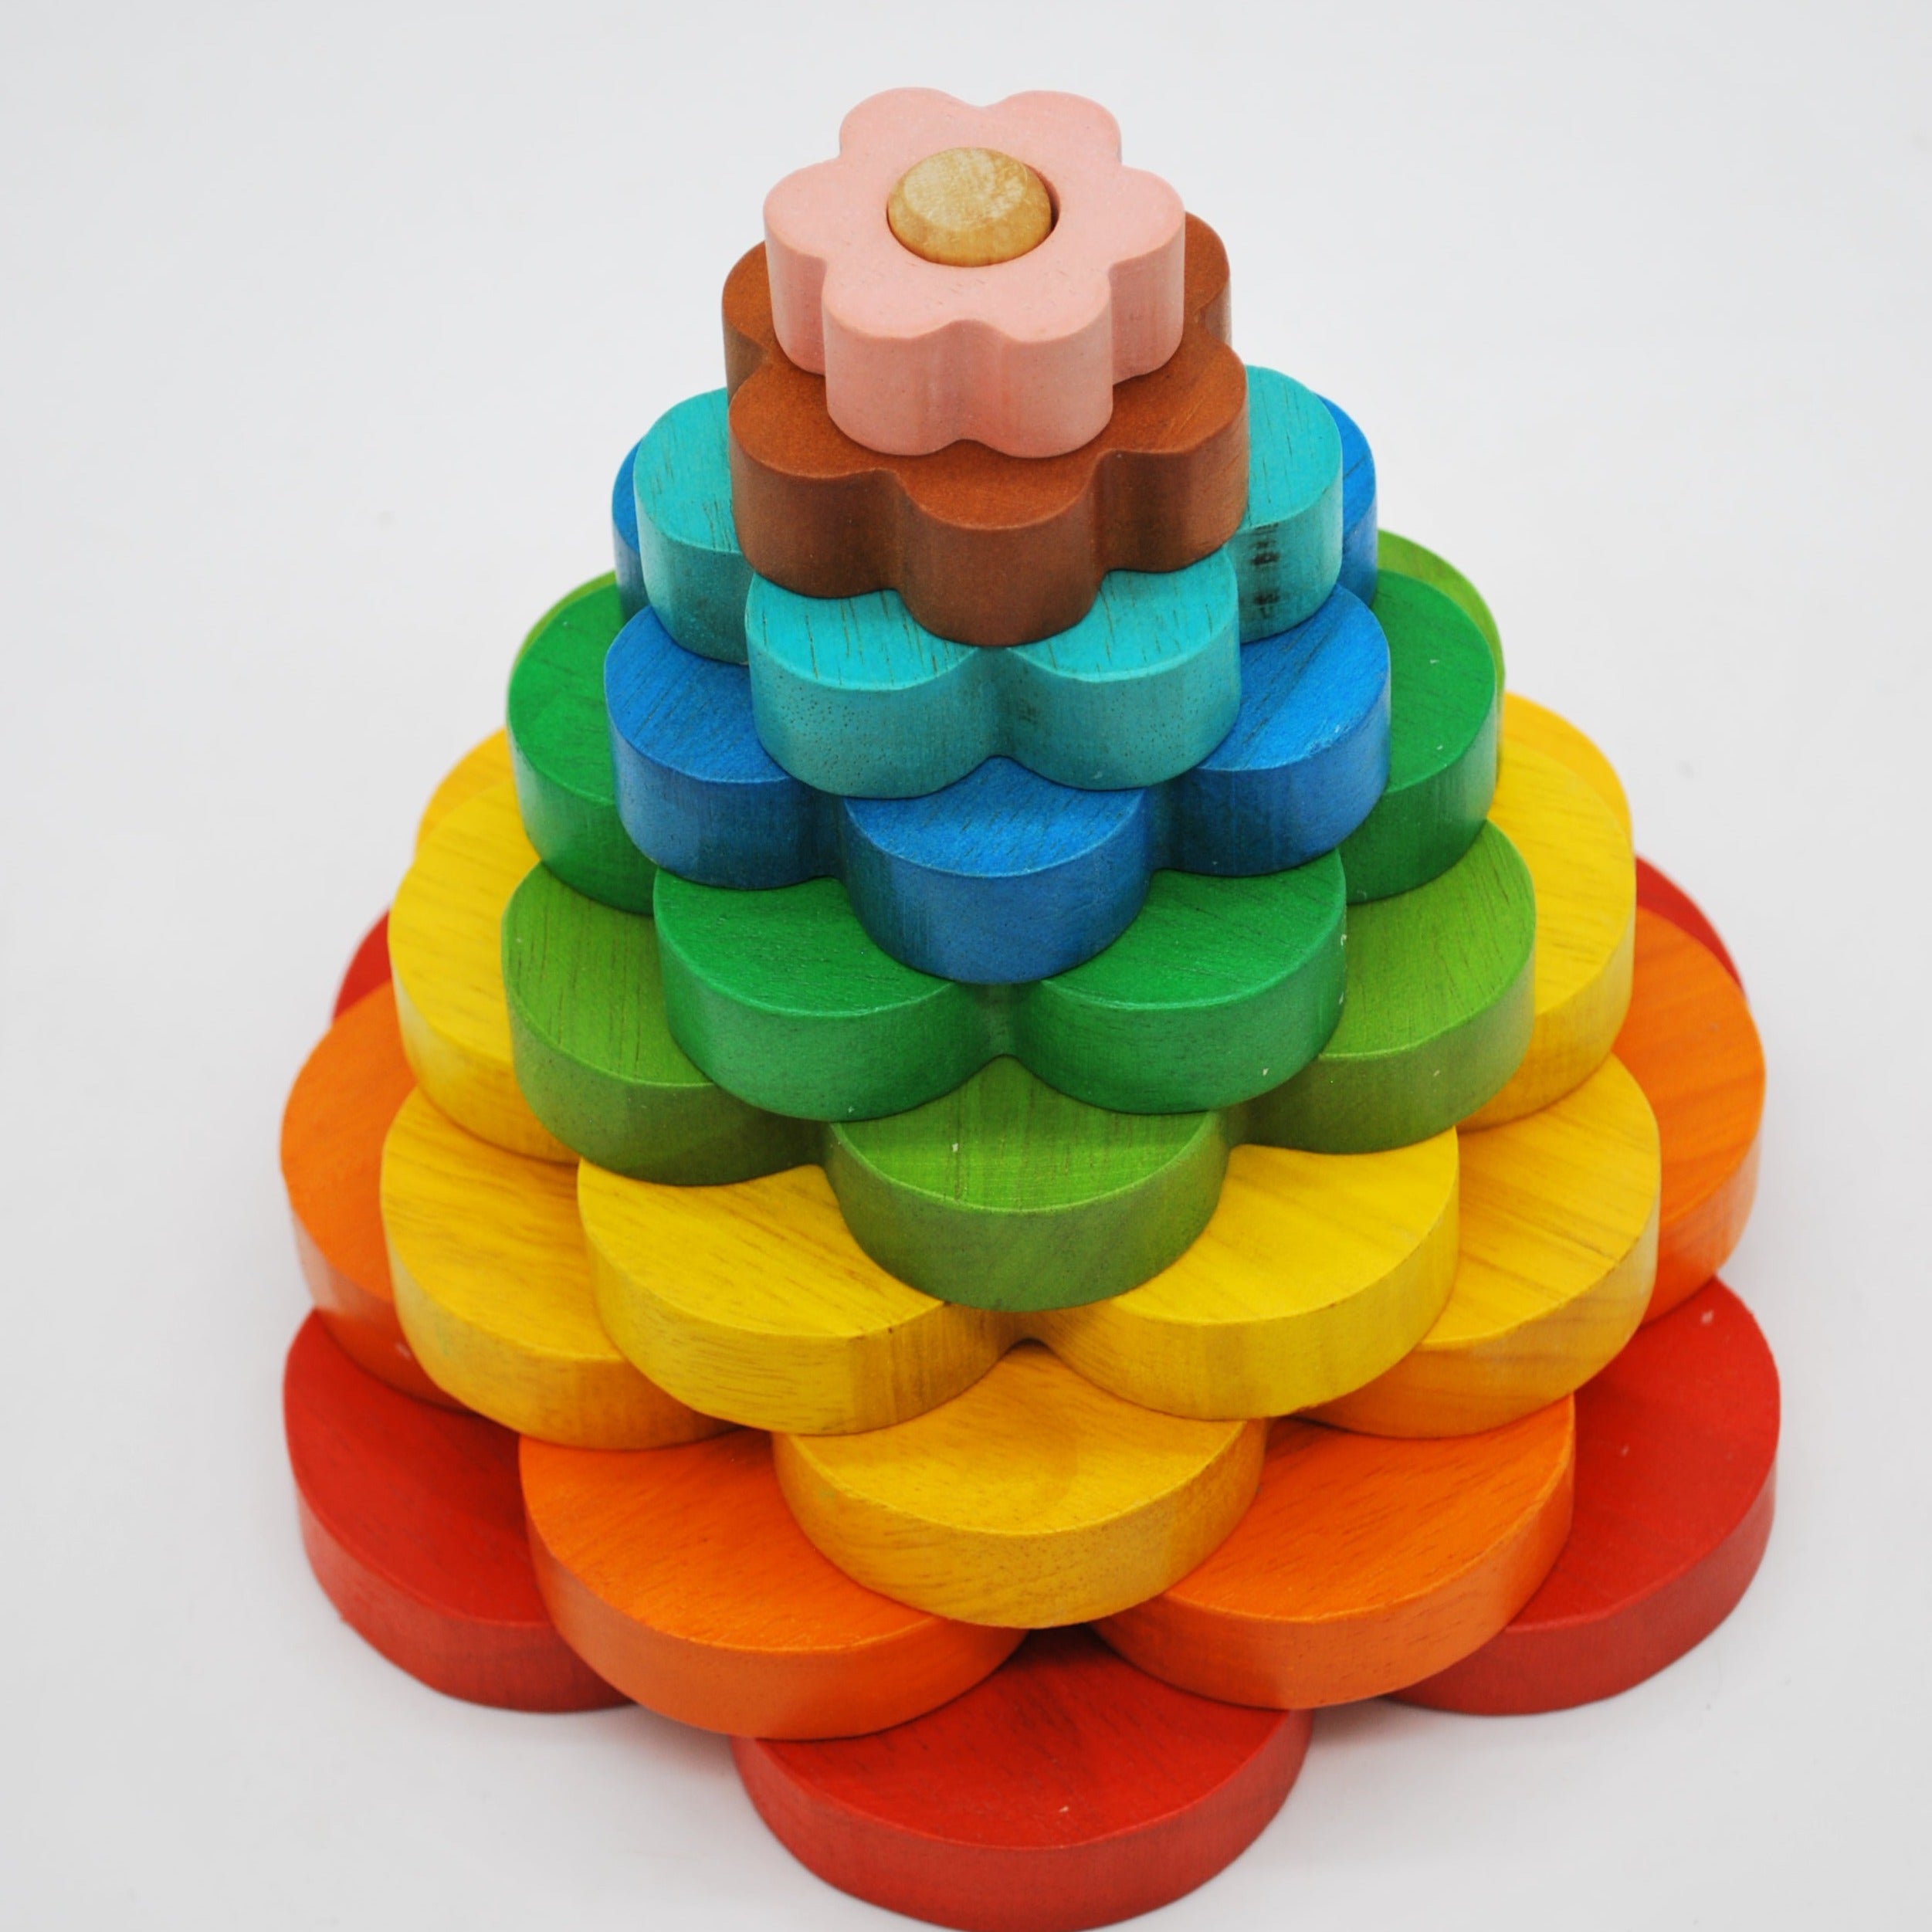 Flower wooden stack toys